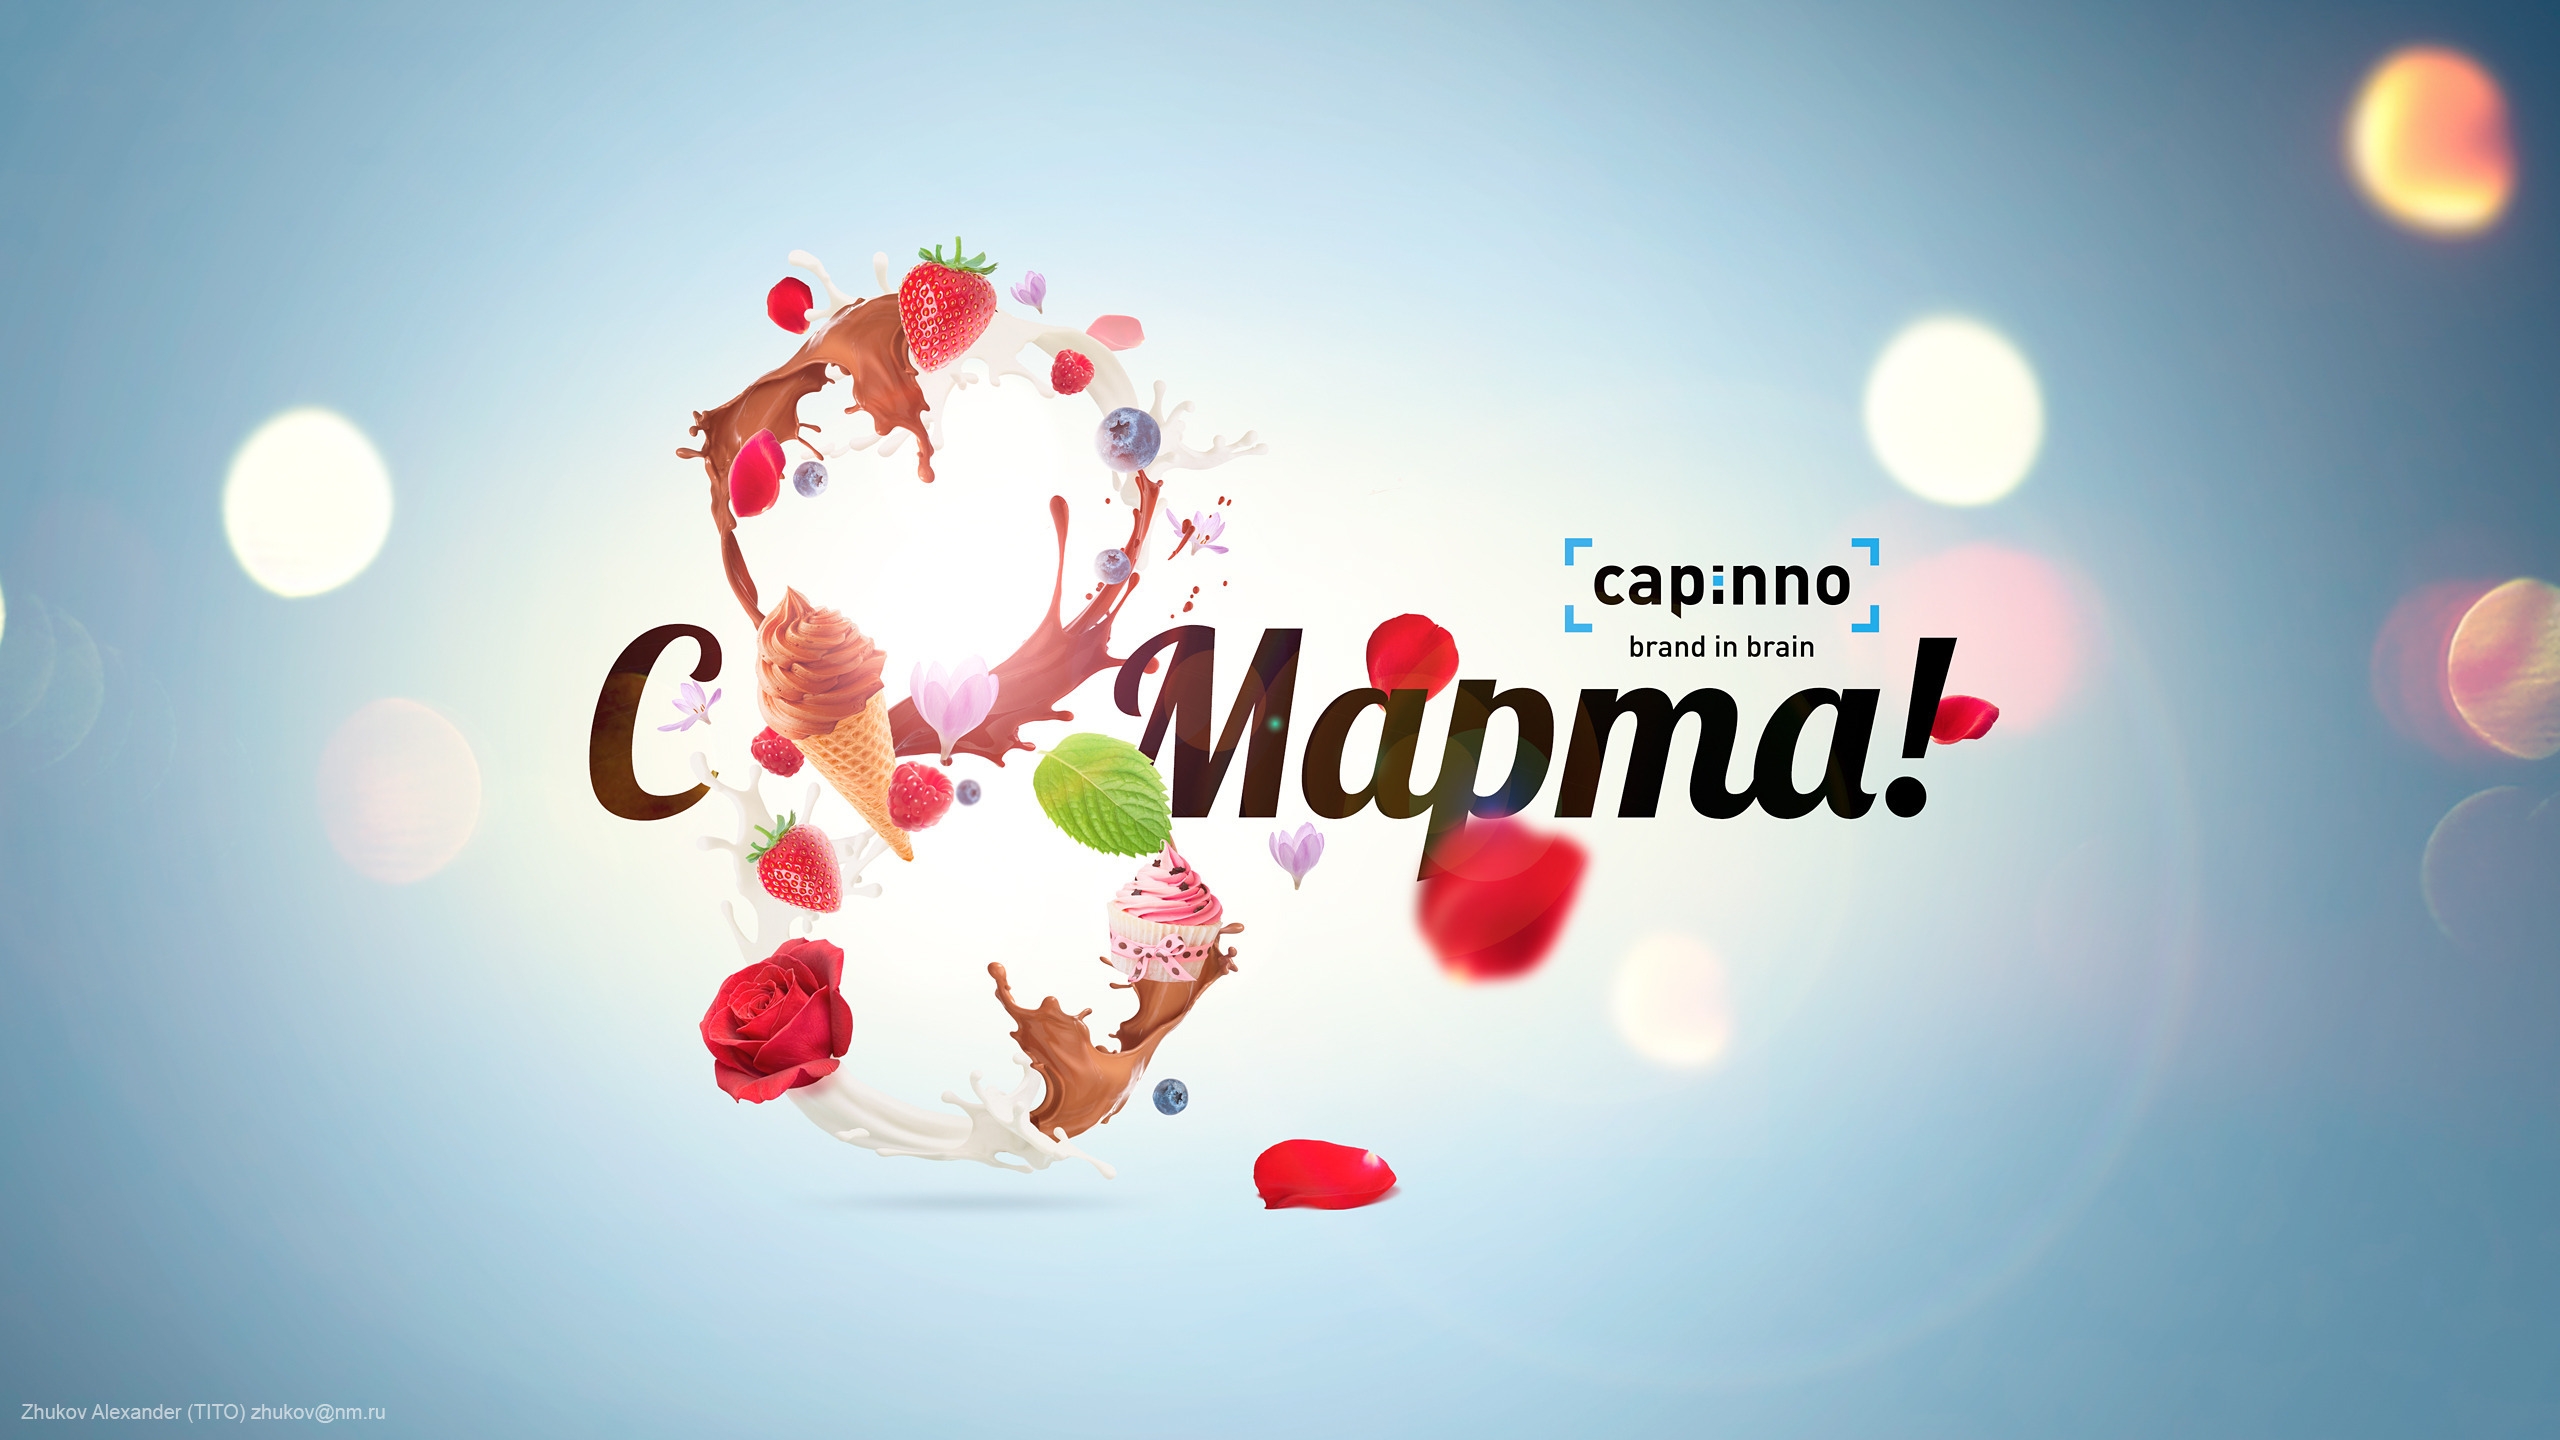 8 March Capinno for 2560x1440 HDTV resolution